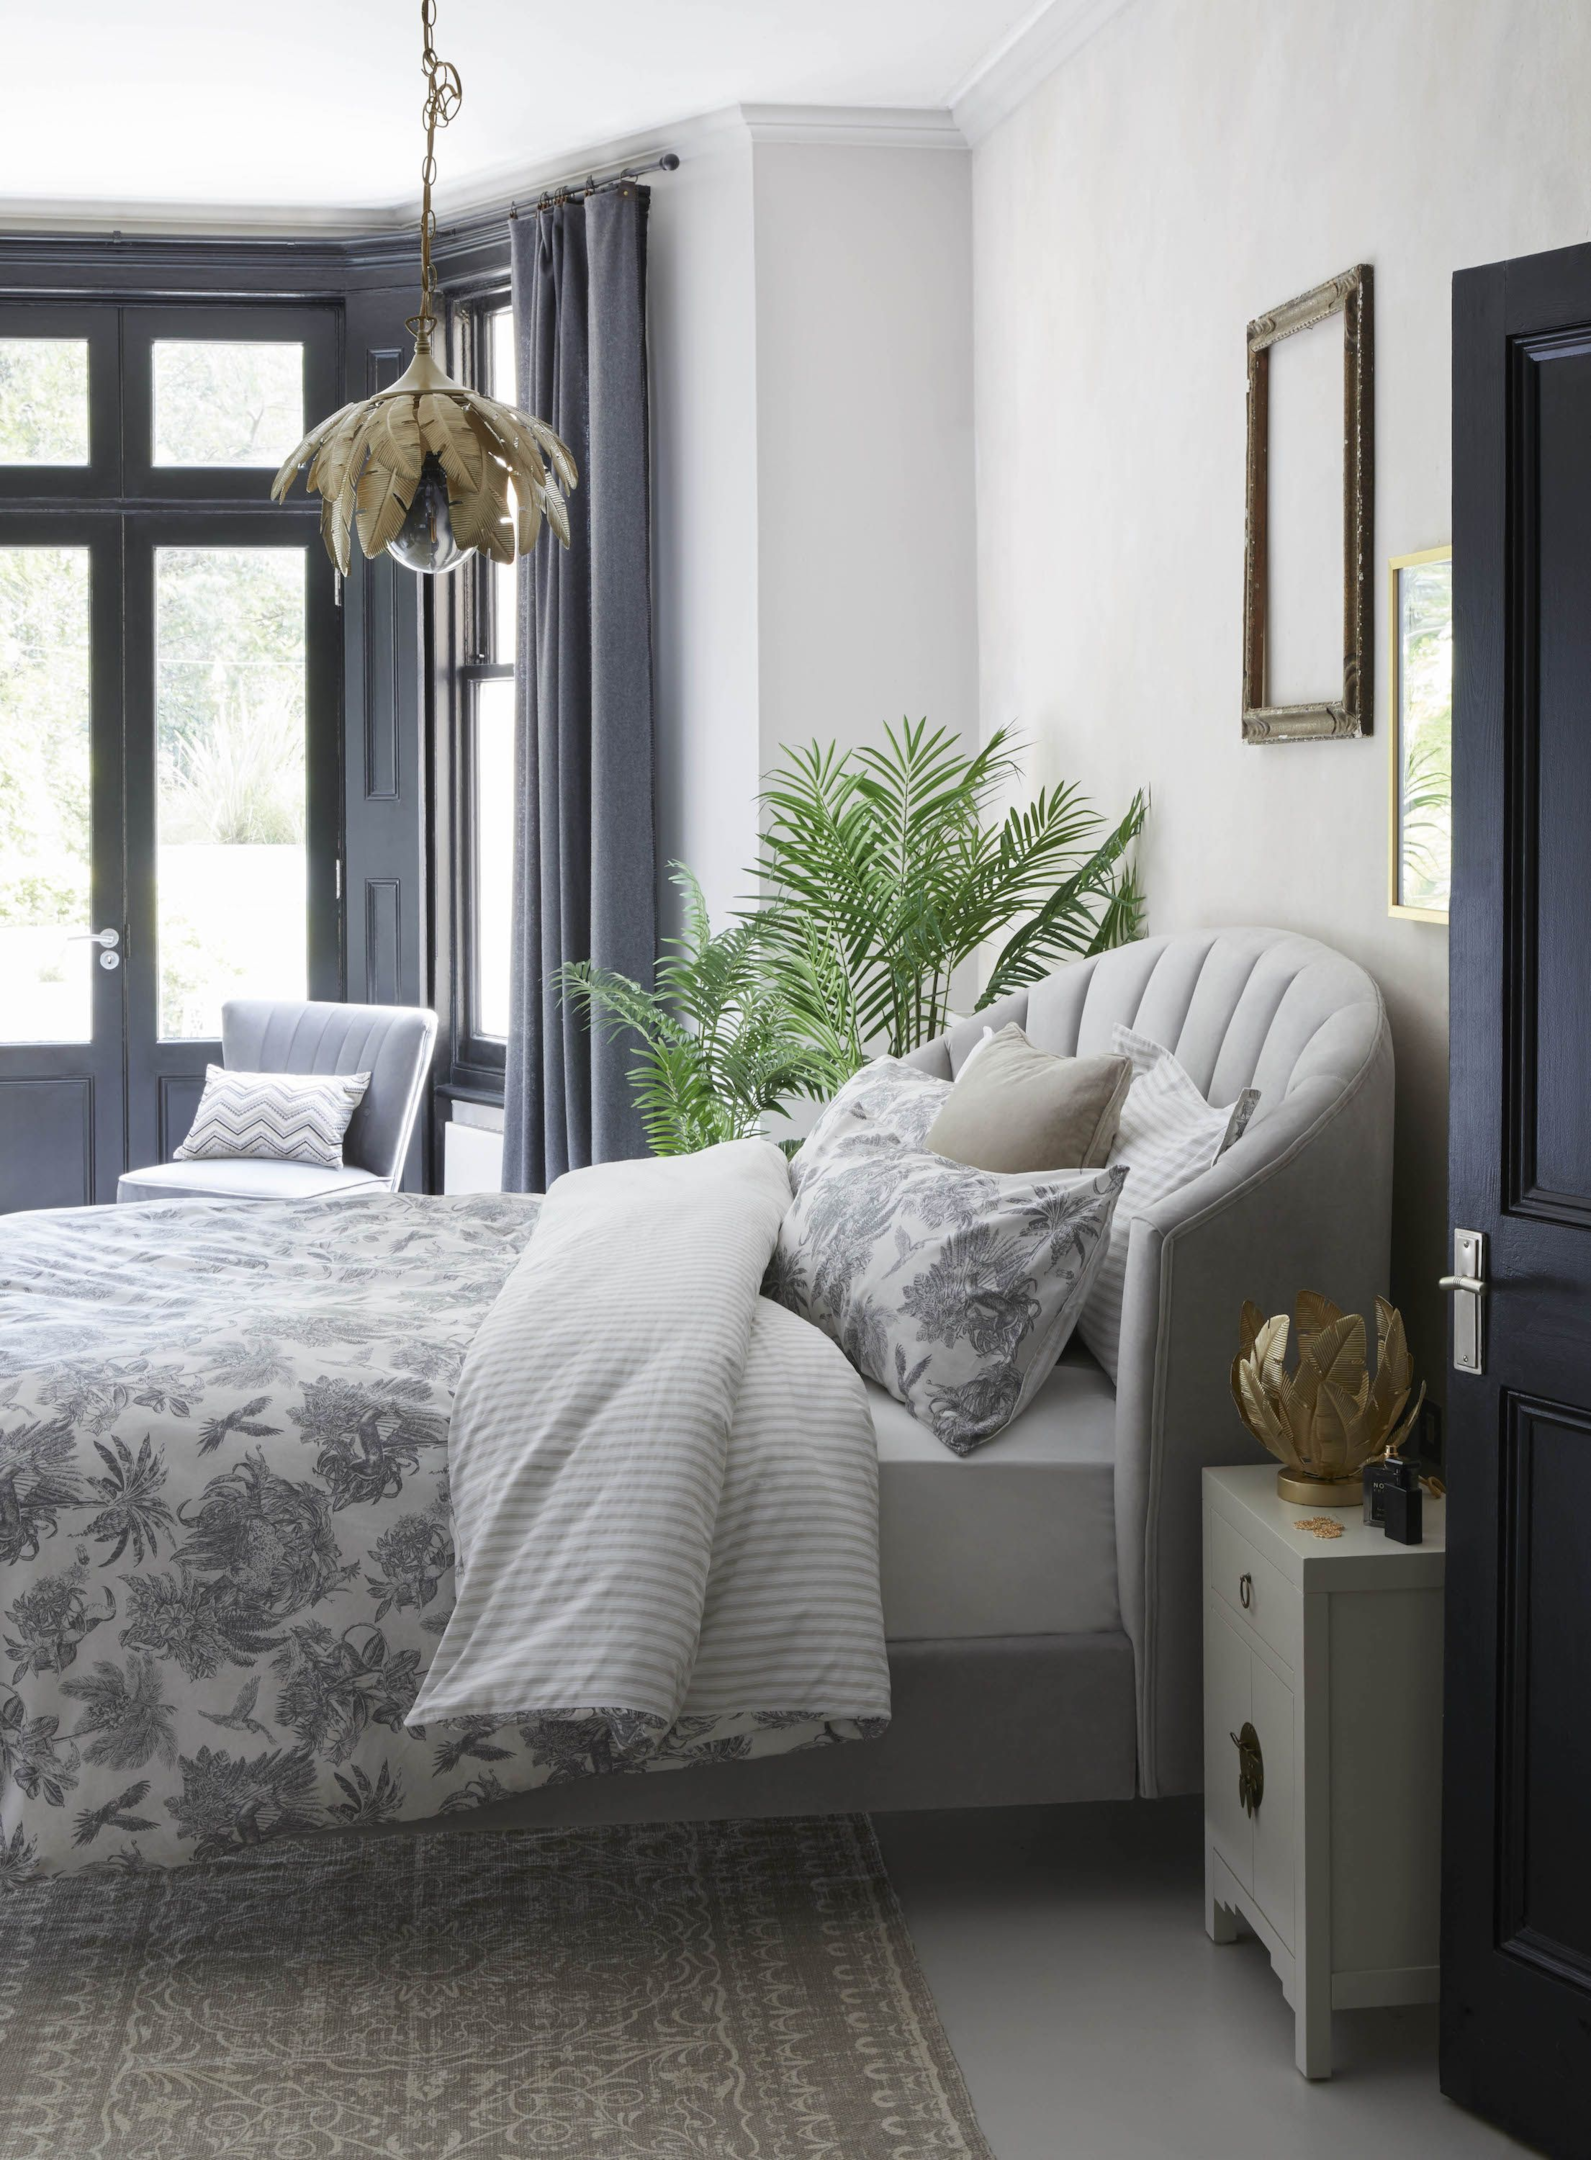 Why Choose Grey for Small Bedrooms?